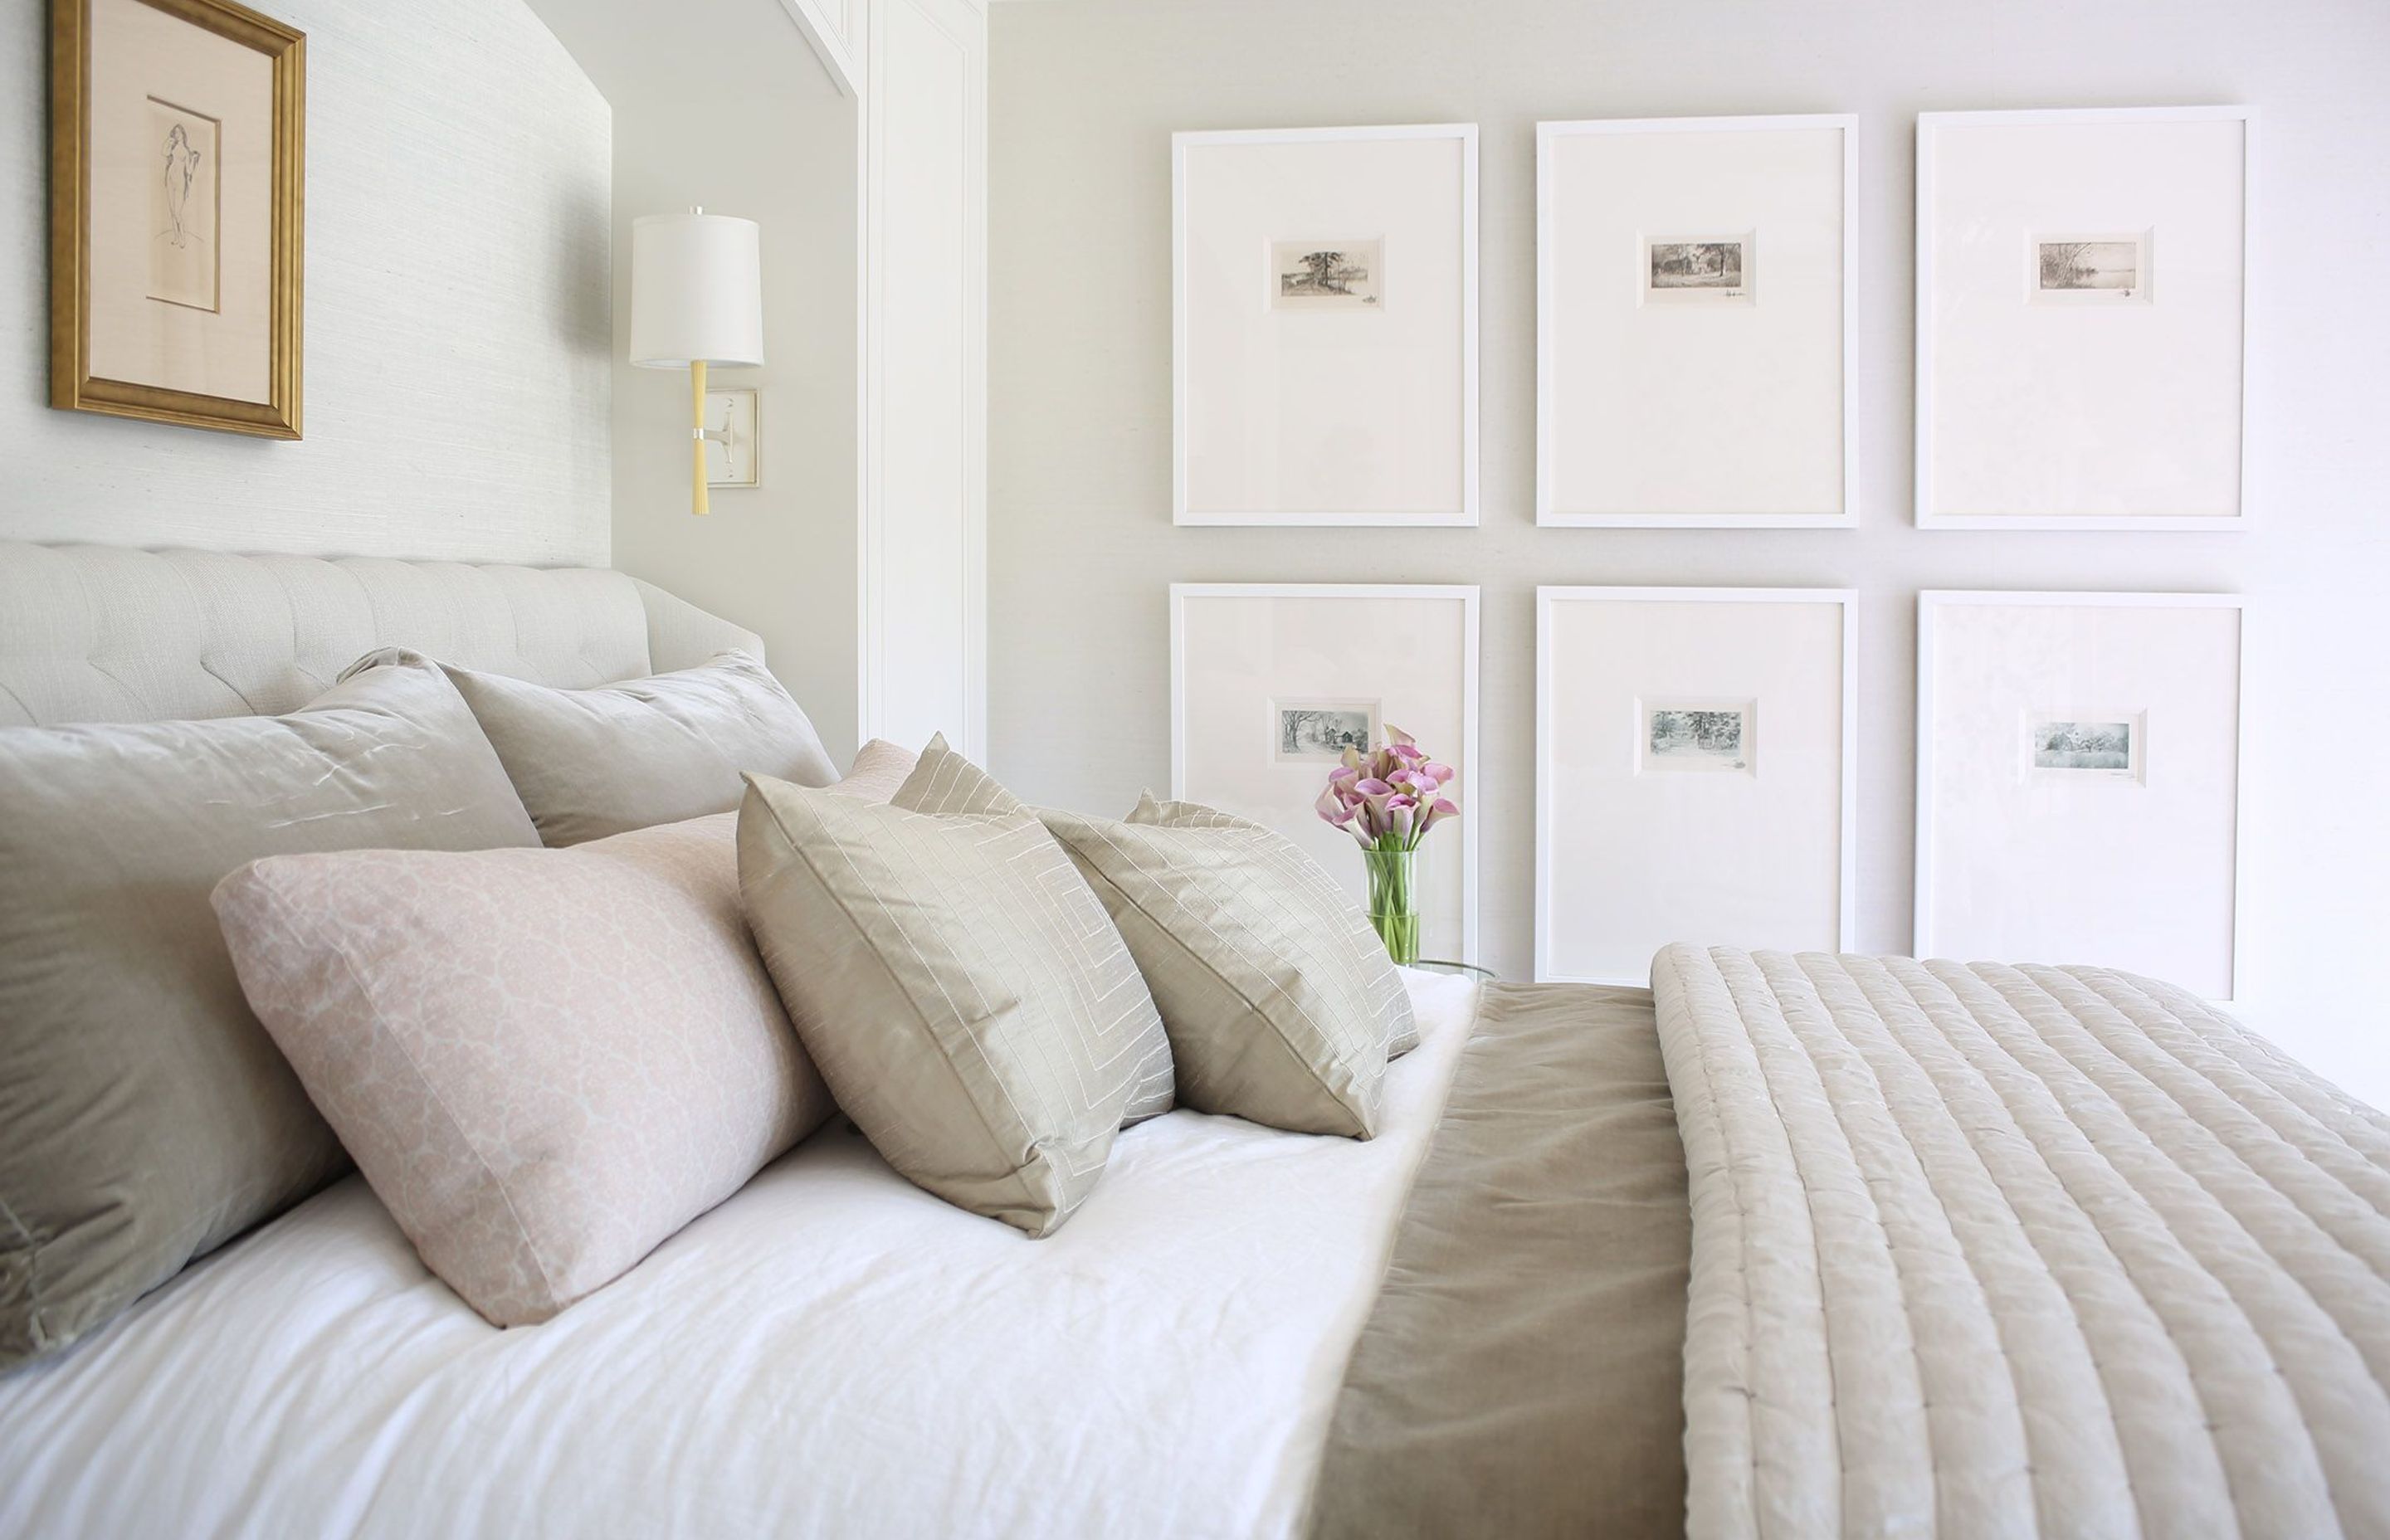 Wall Art and Bed.  Interiors by Lisa Tharp.